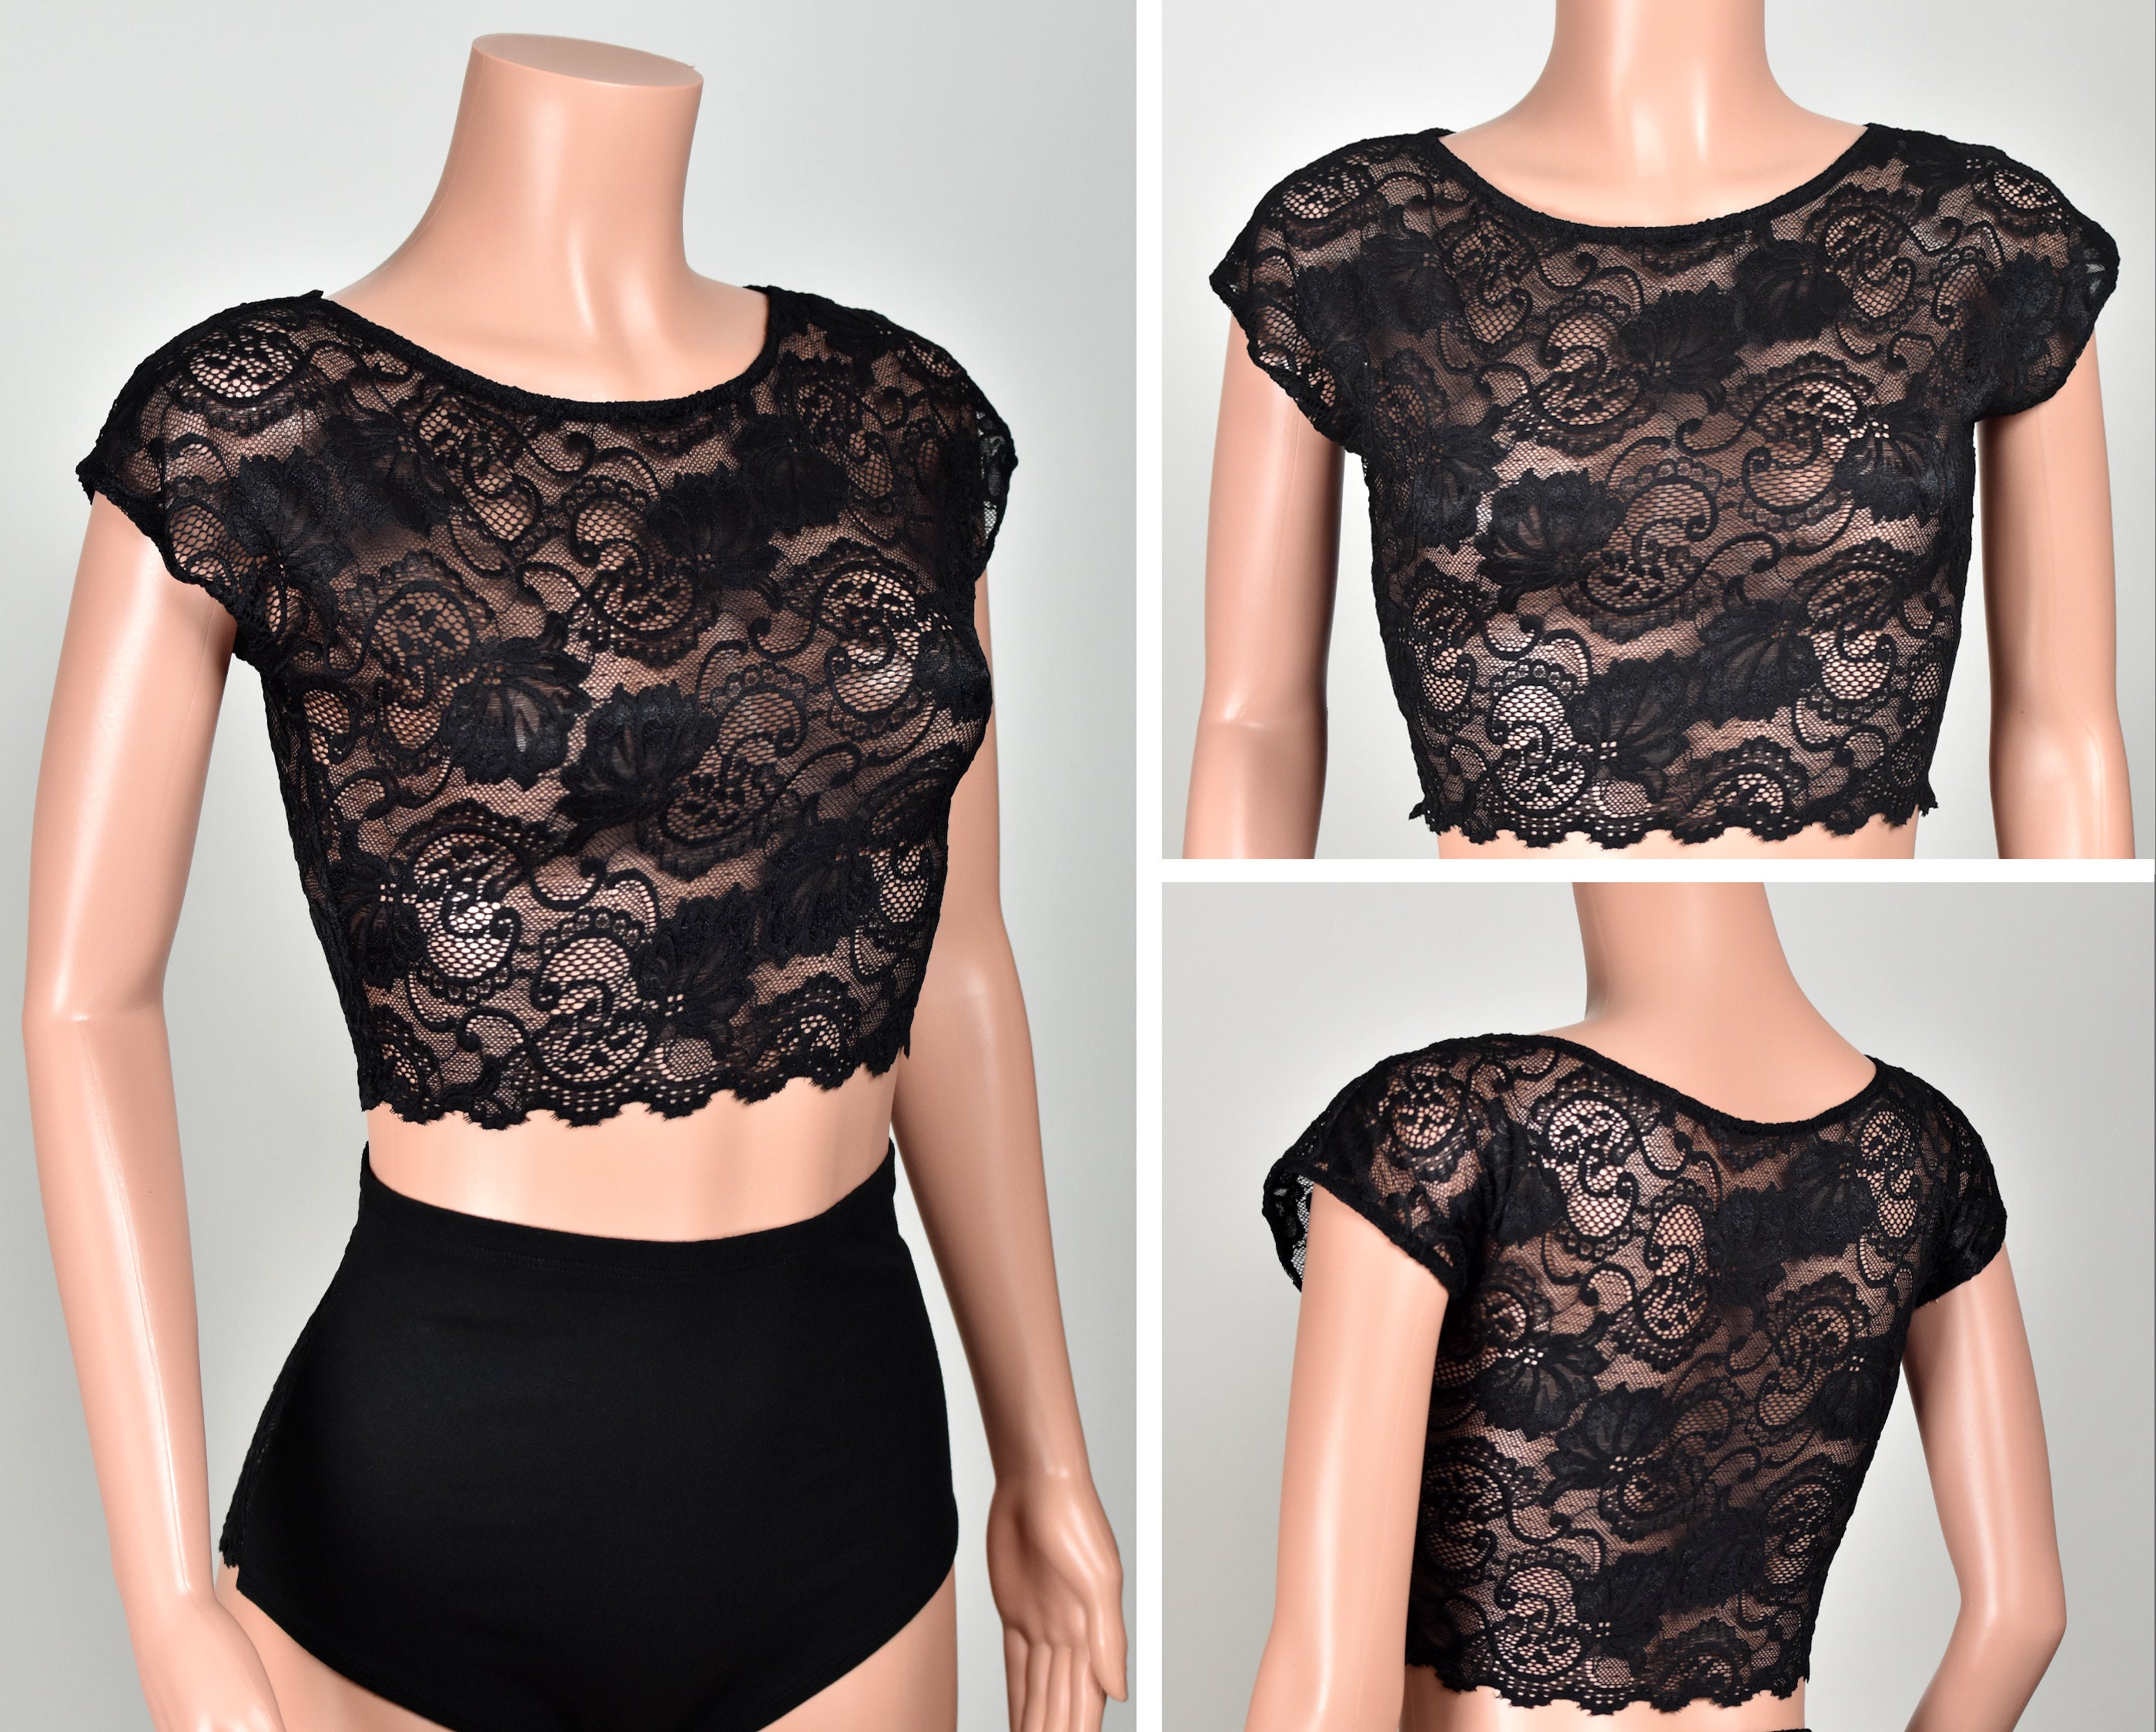  Black Sheer Elastic Floral Lace Bandeau Top, Size XS to XL :  Handmade Products